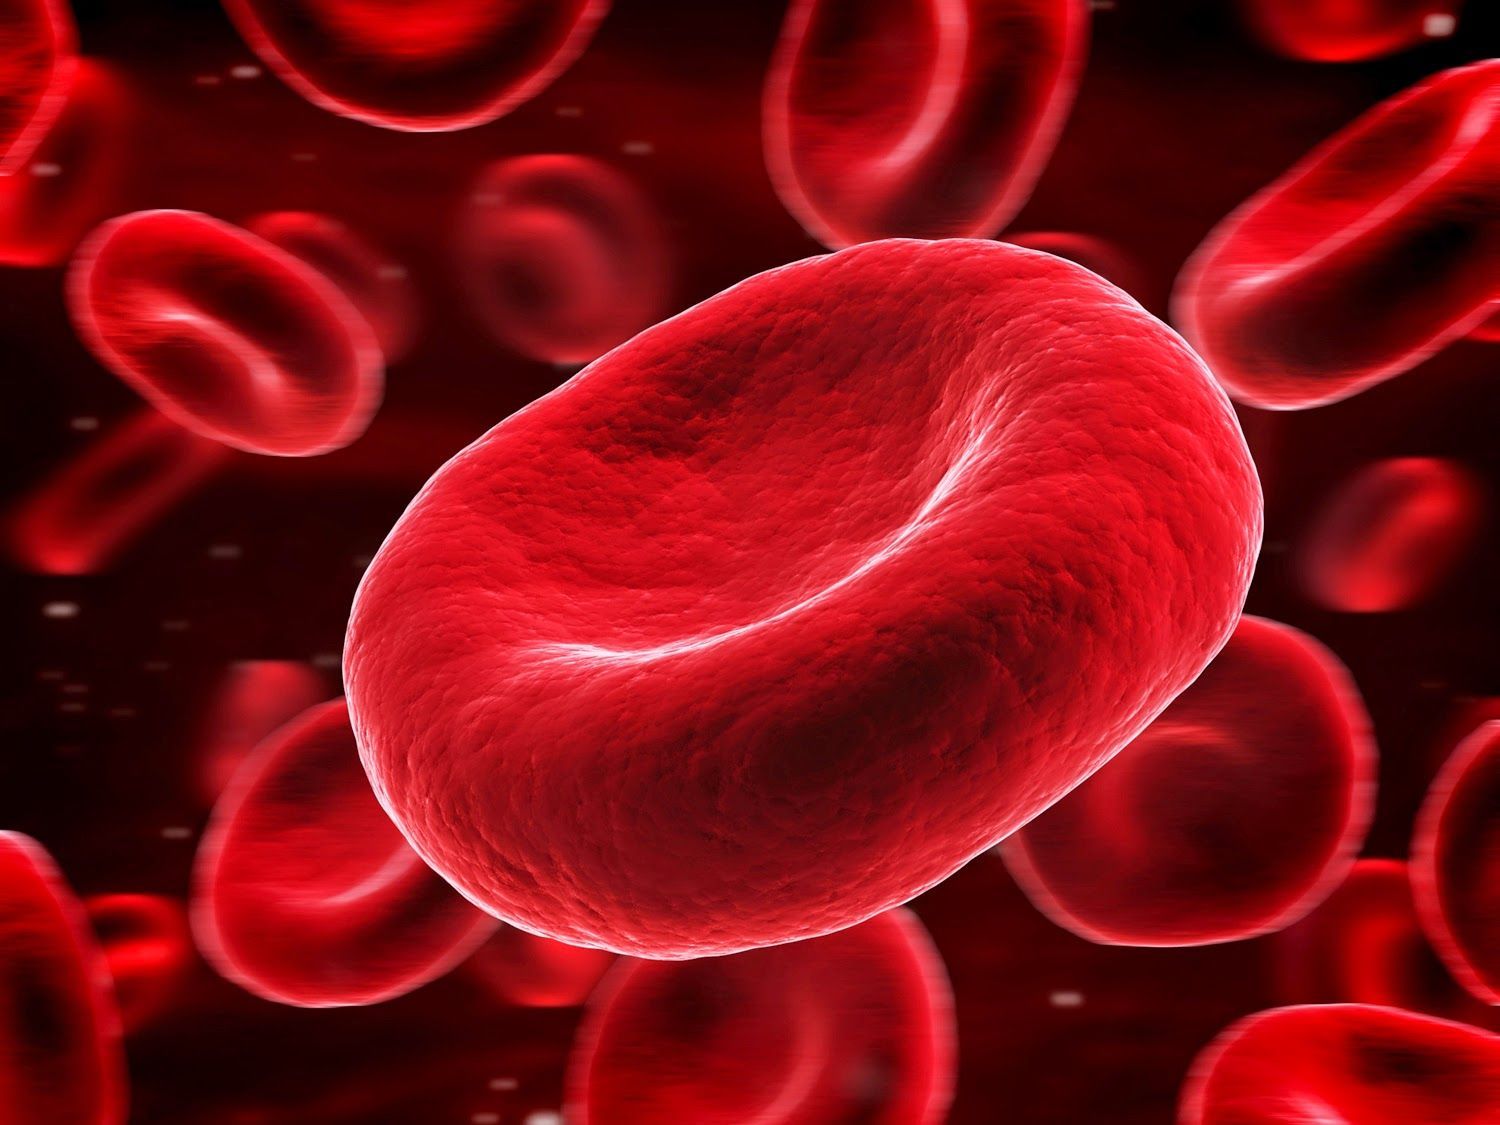 Blood cells and red liquid in the background - Blood